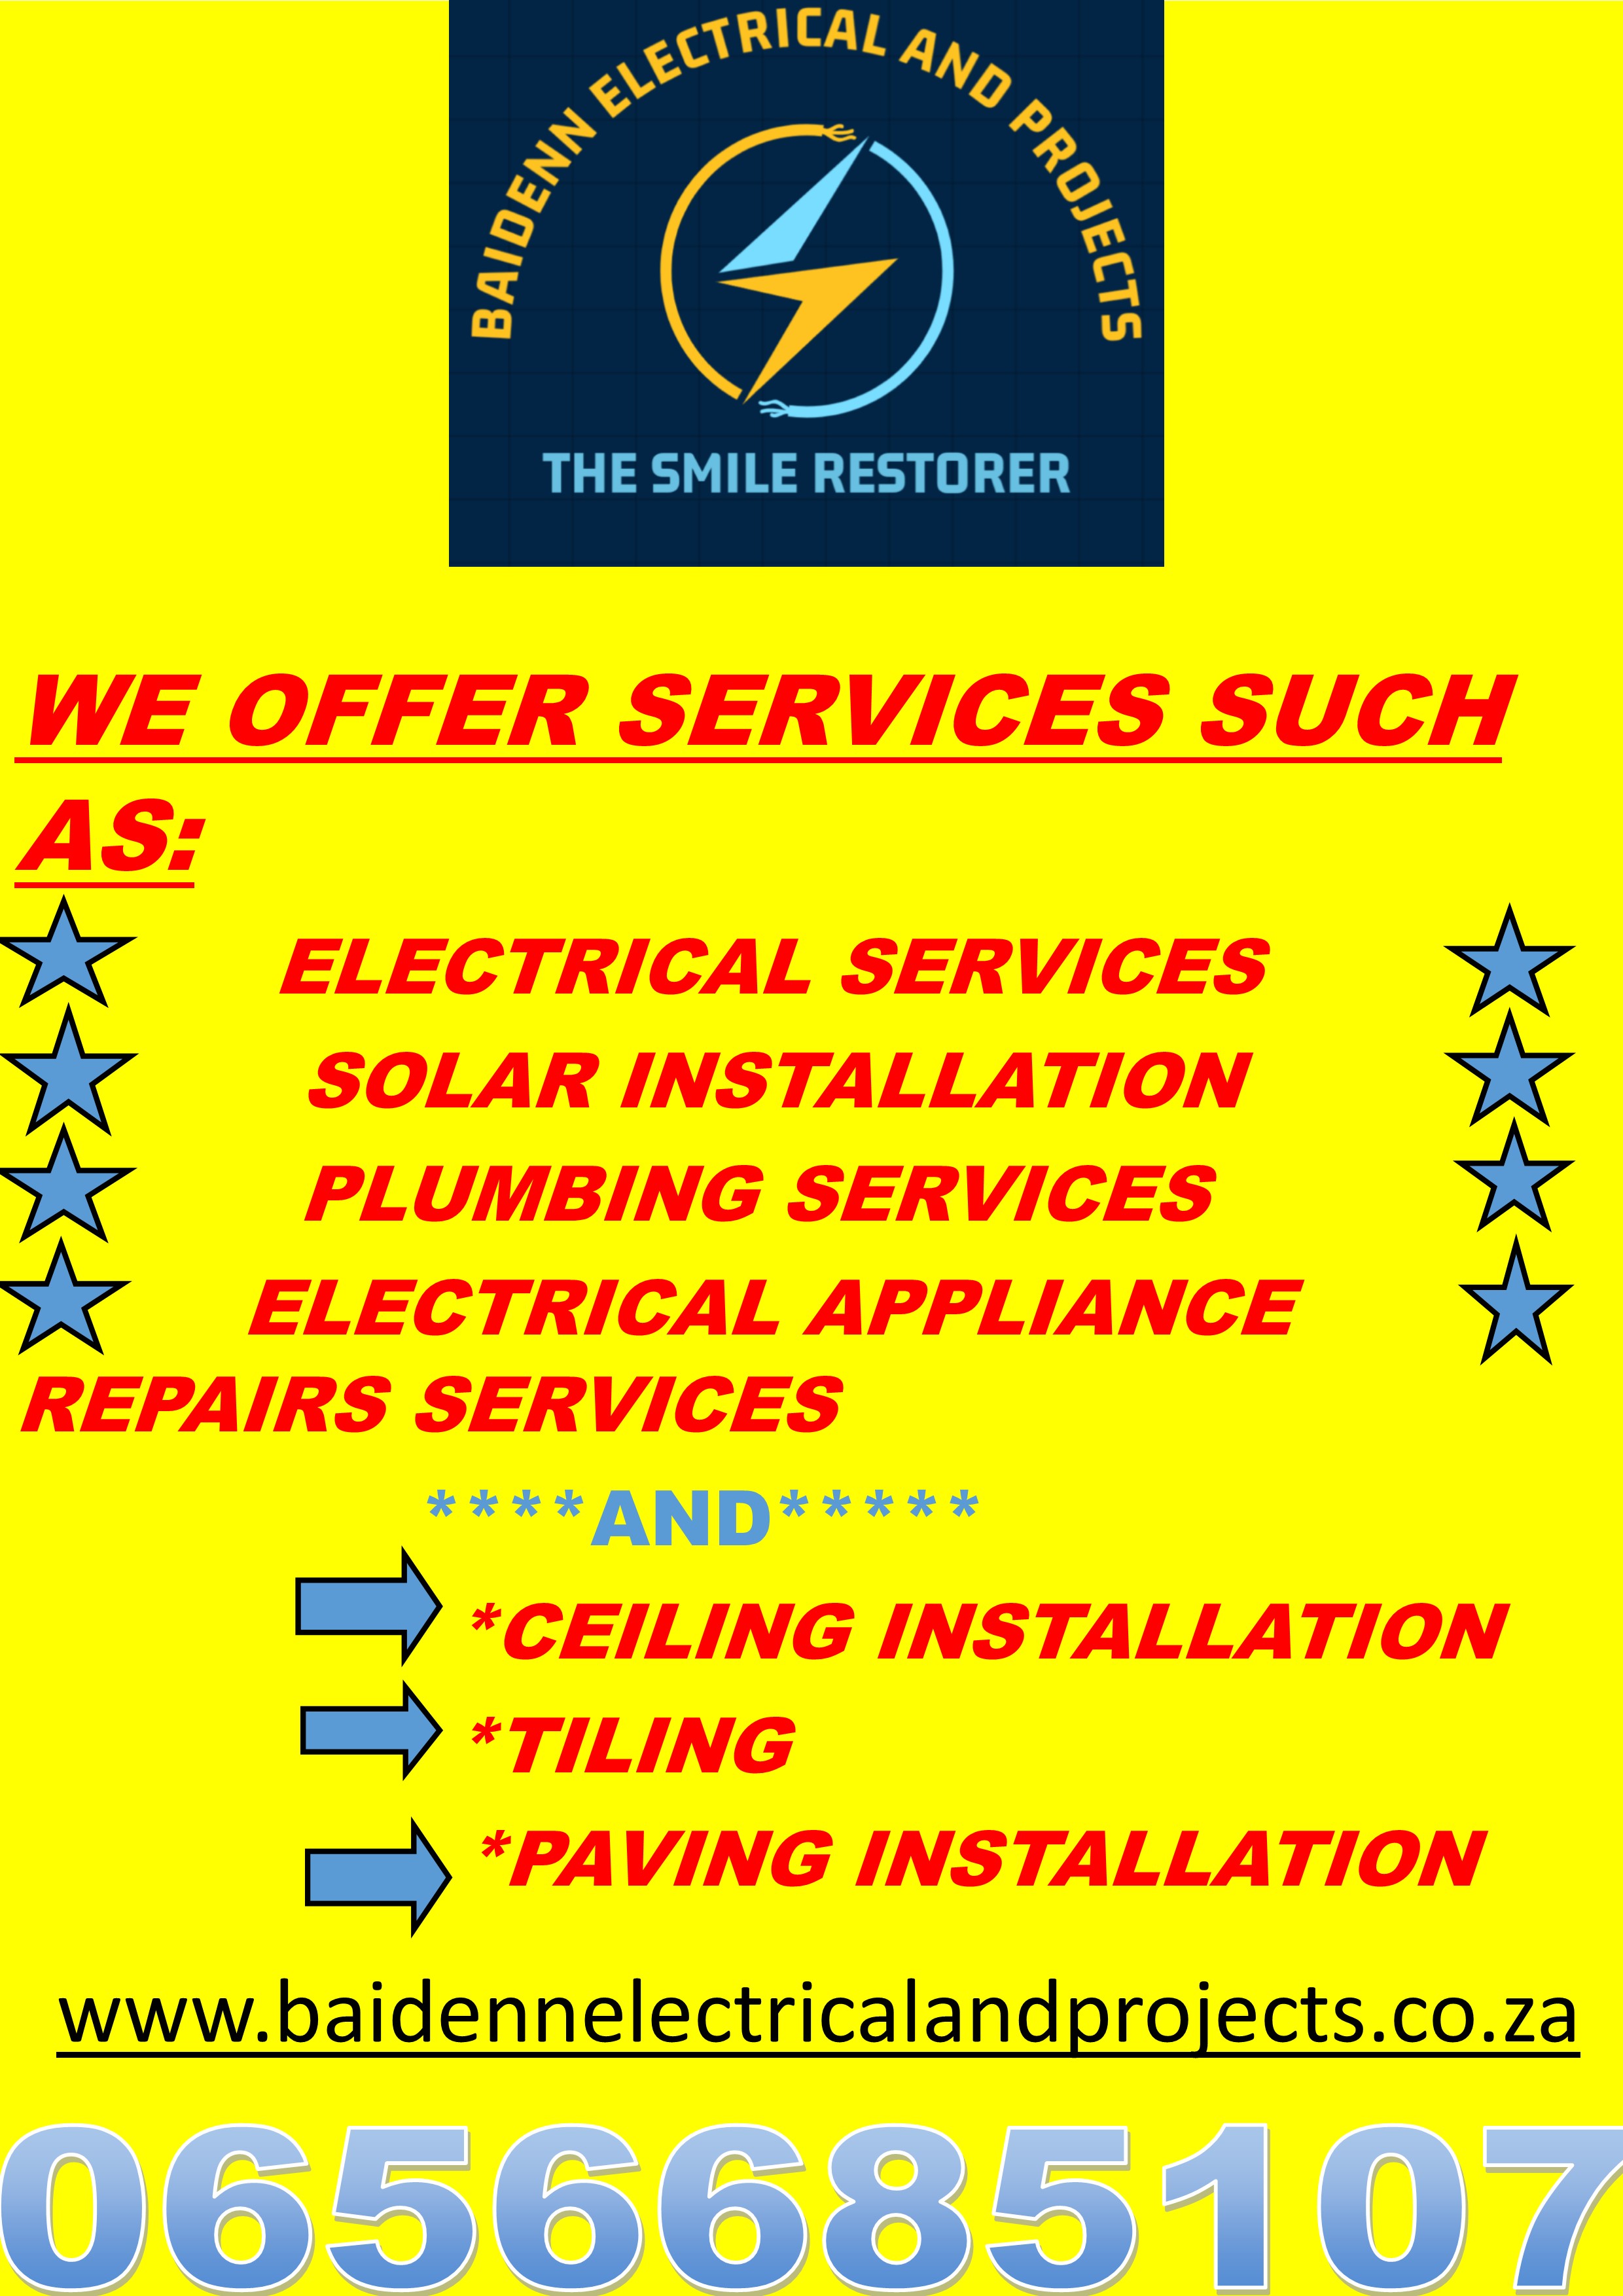 Our offers